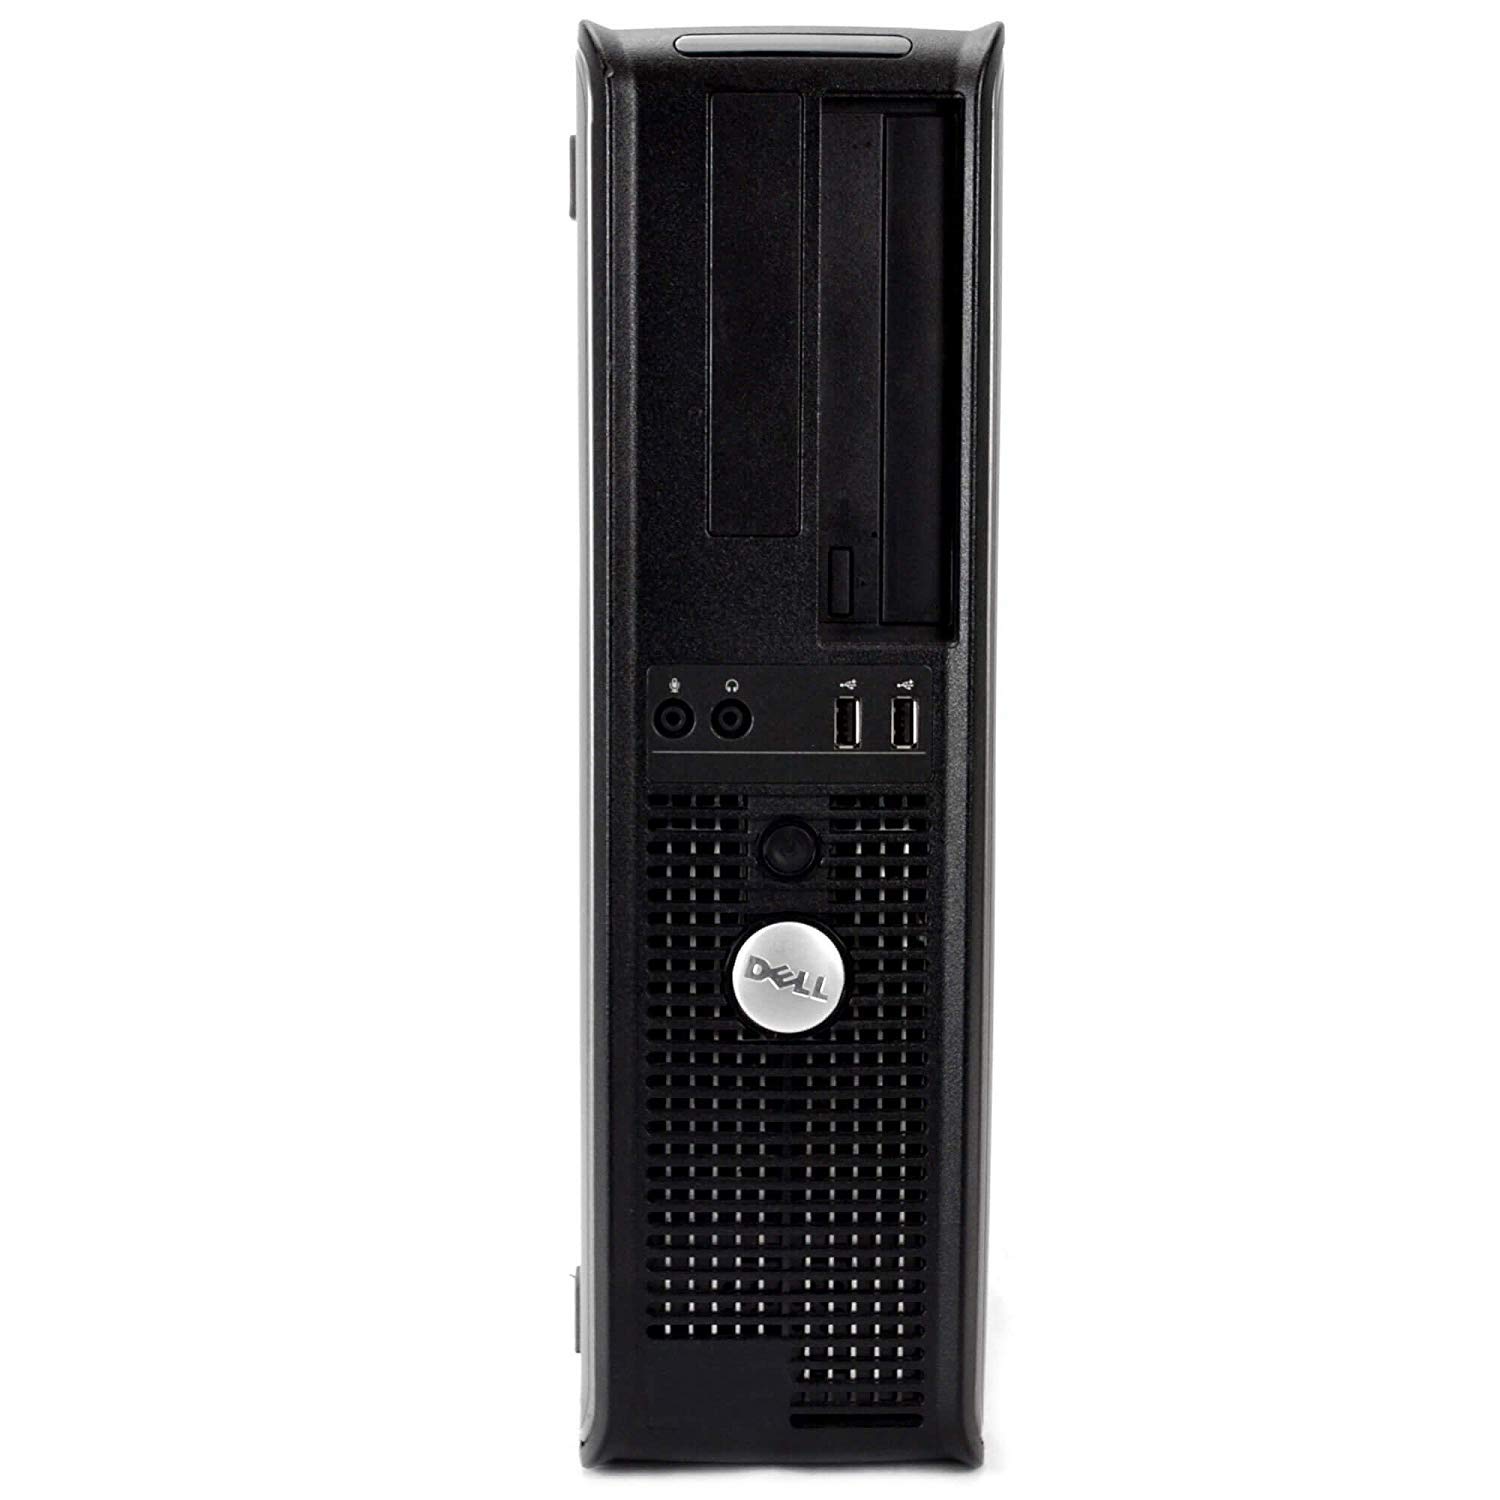 DELL Optiplex Windows 10, Core 2 Duo 3.0GHz, 8GB, 1TB, with Dual 19in LCD Monitors (Brands may vary) (Renewed)']